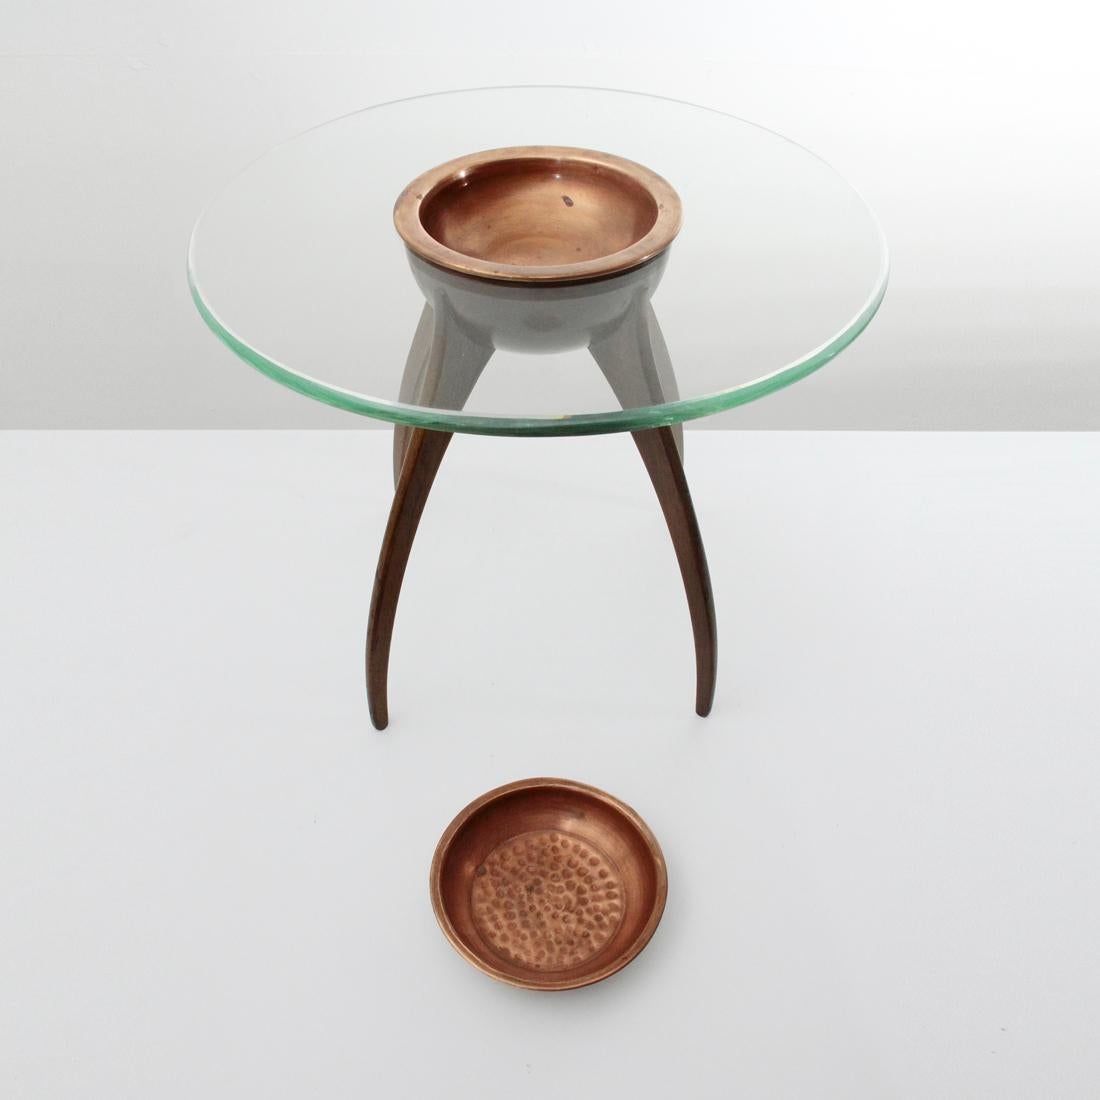 Mid-Century Modern Italian Midcentury Coffee Table with Copper Cup, 1940s